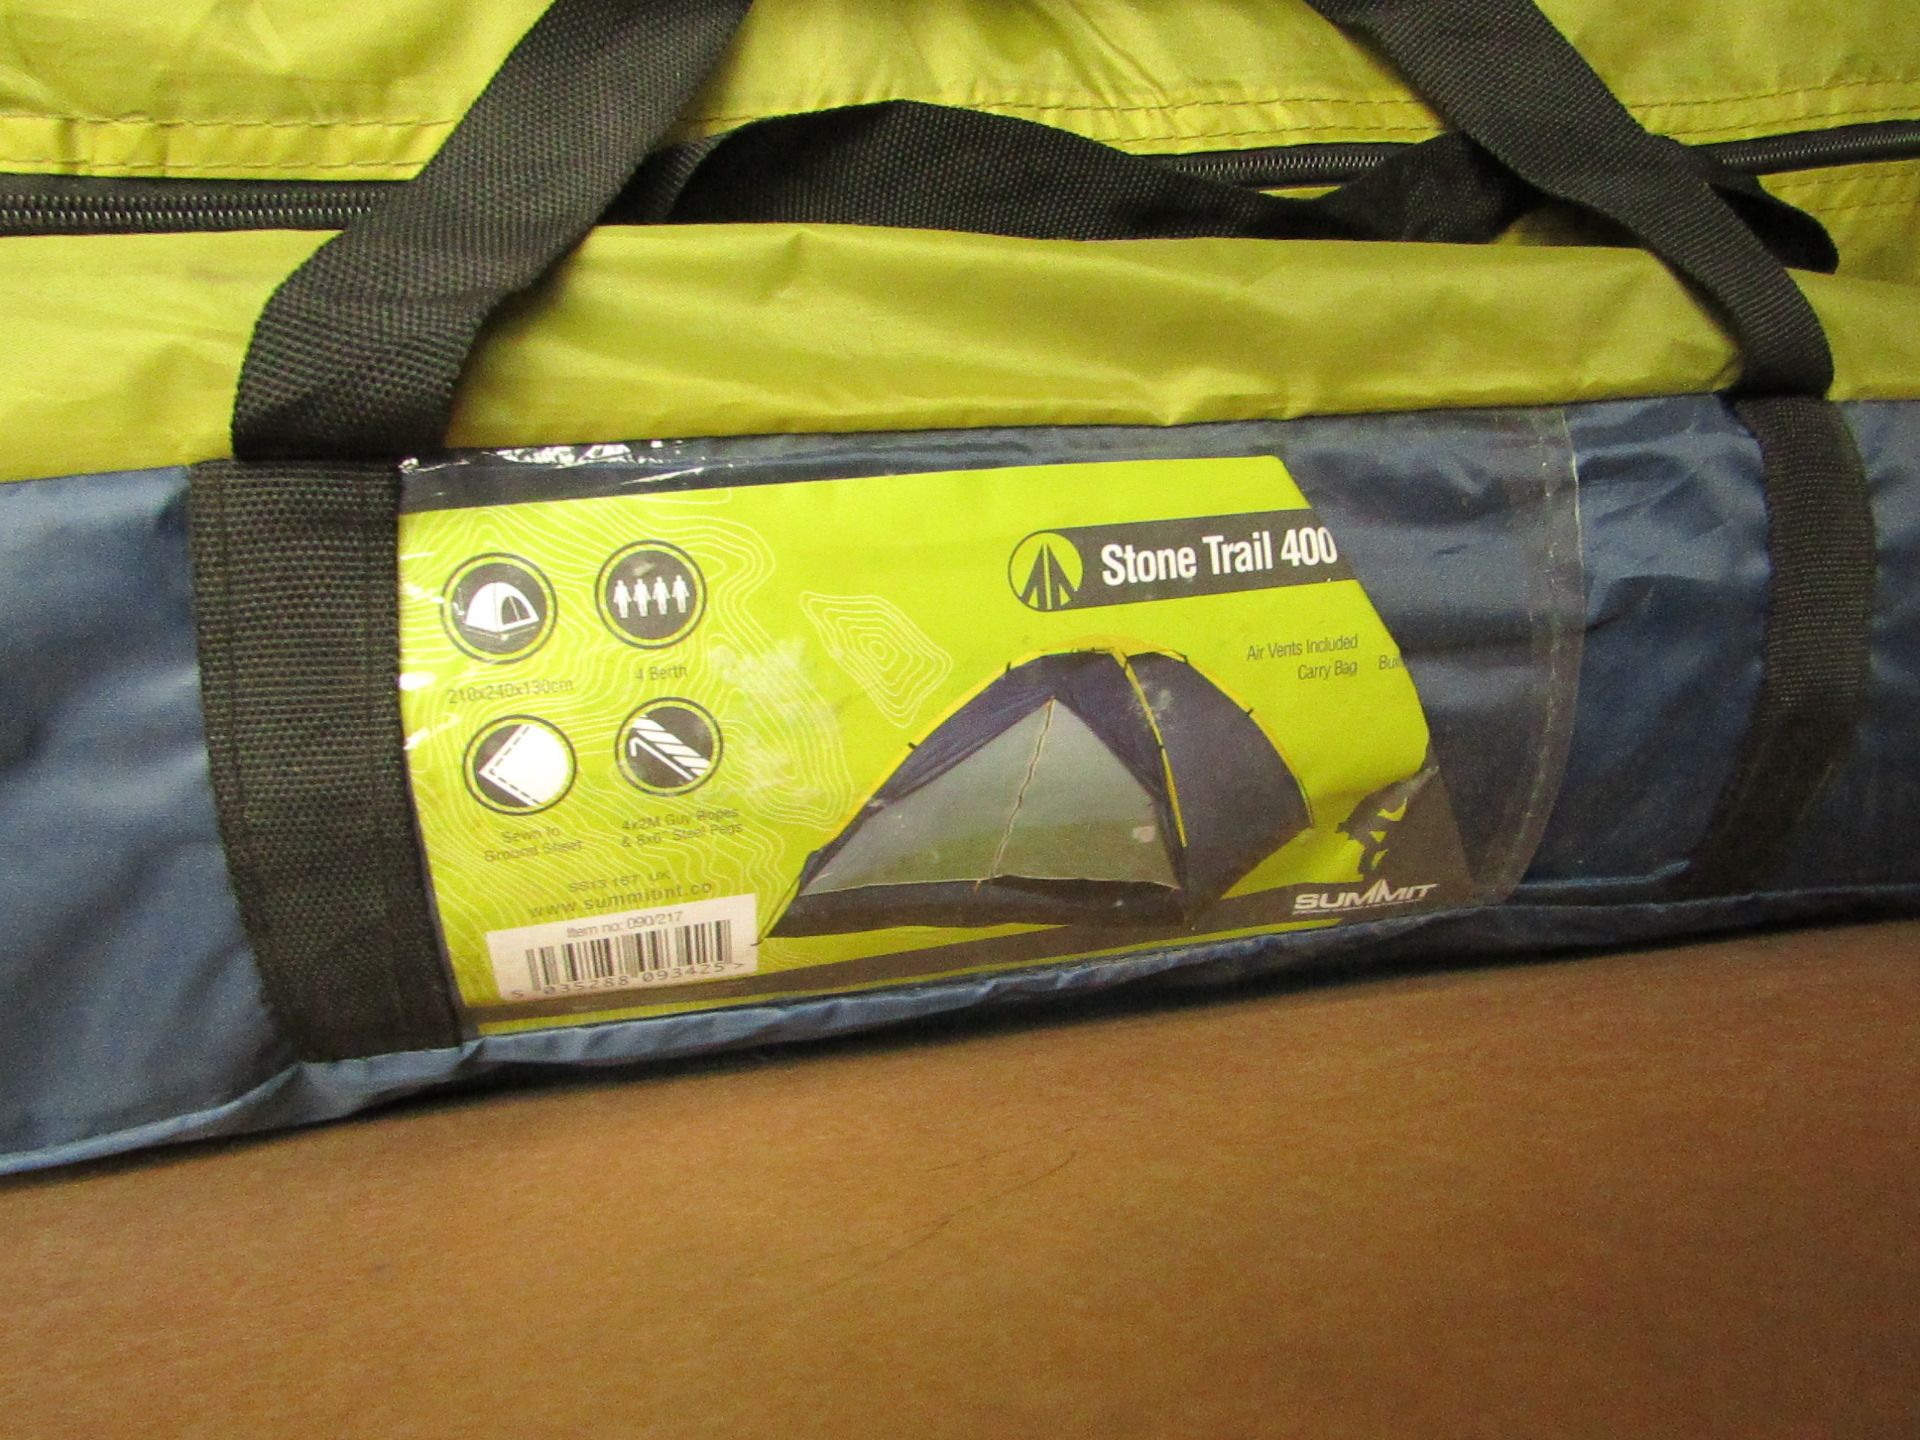 Stone trail 400, 4 person tent with sewn in groundsheet, new in carry case.